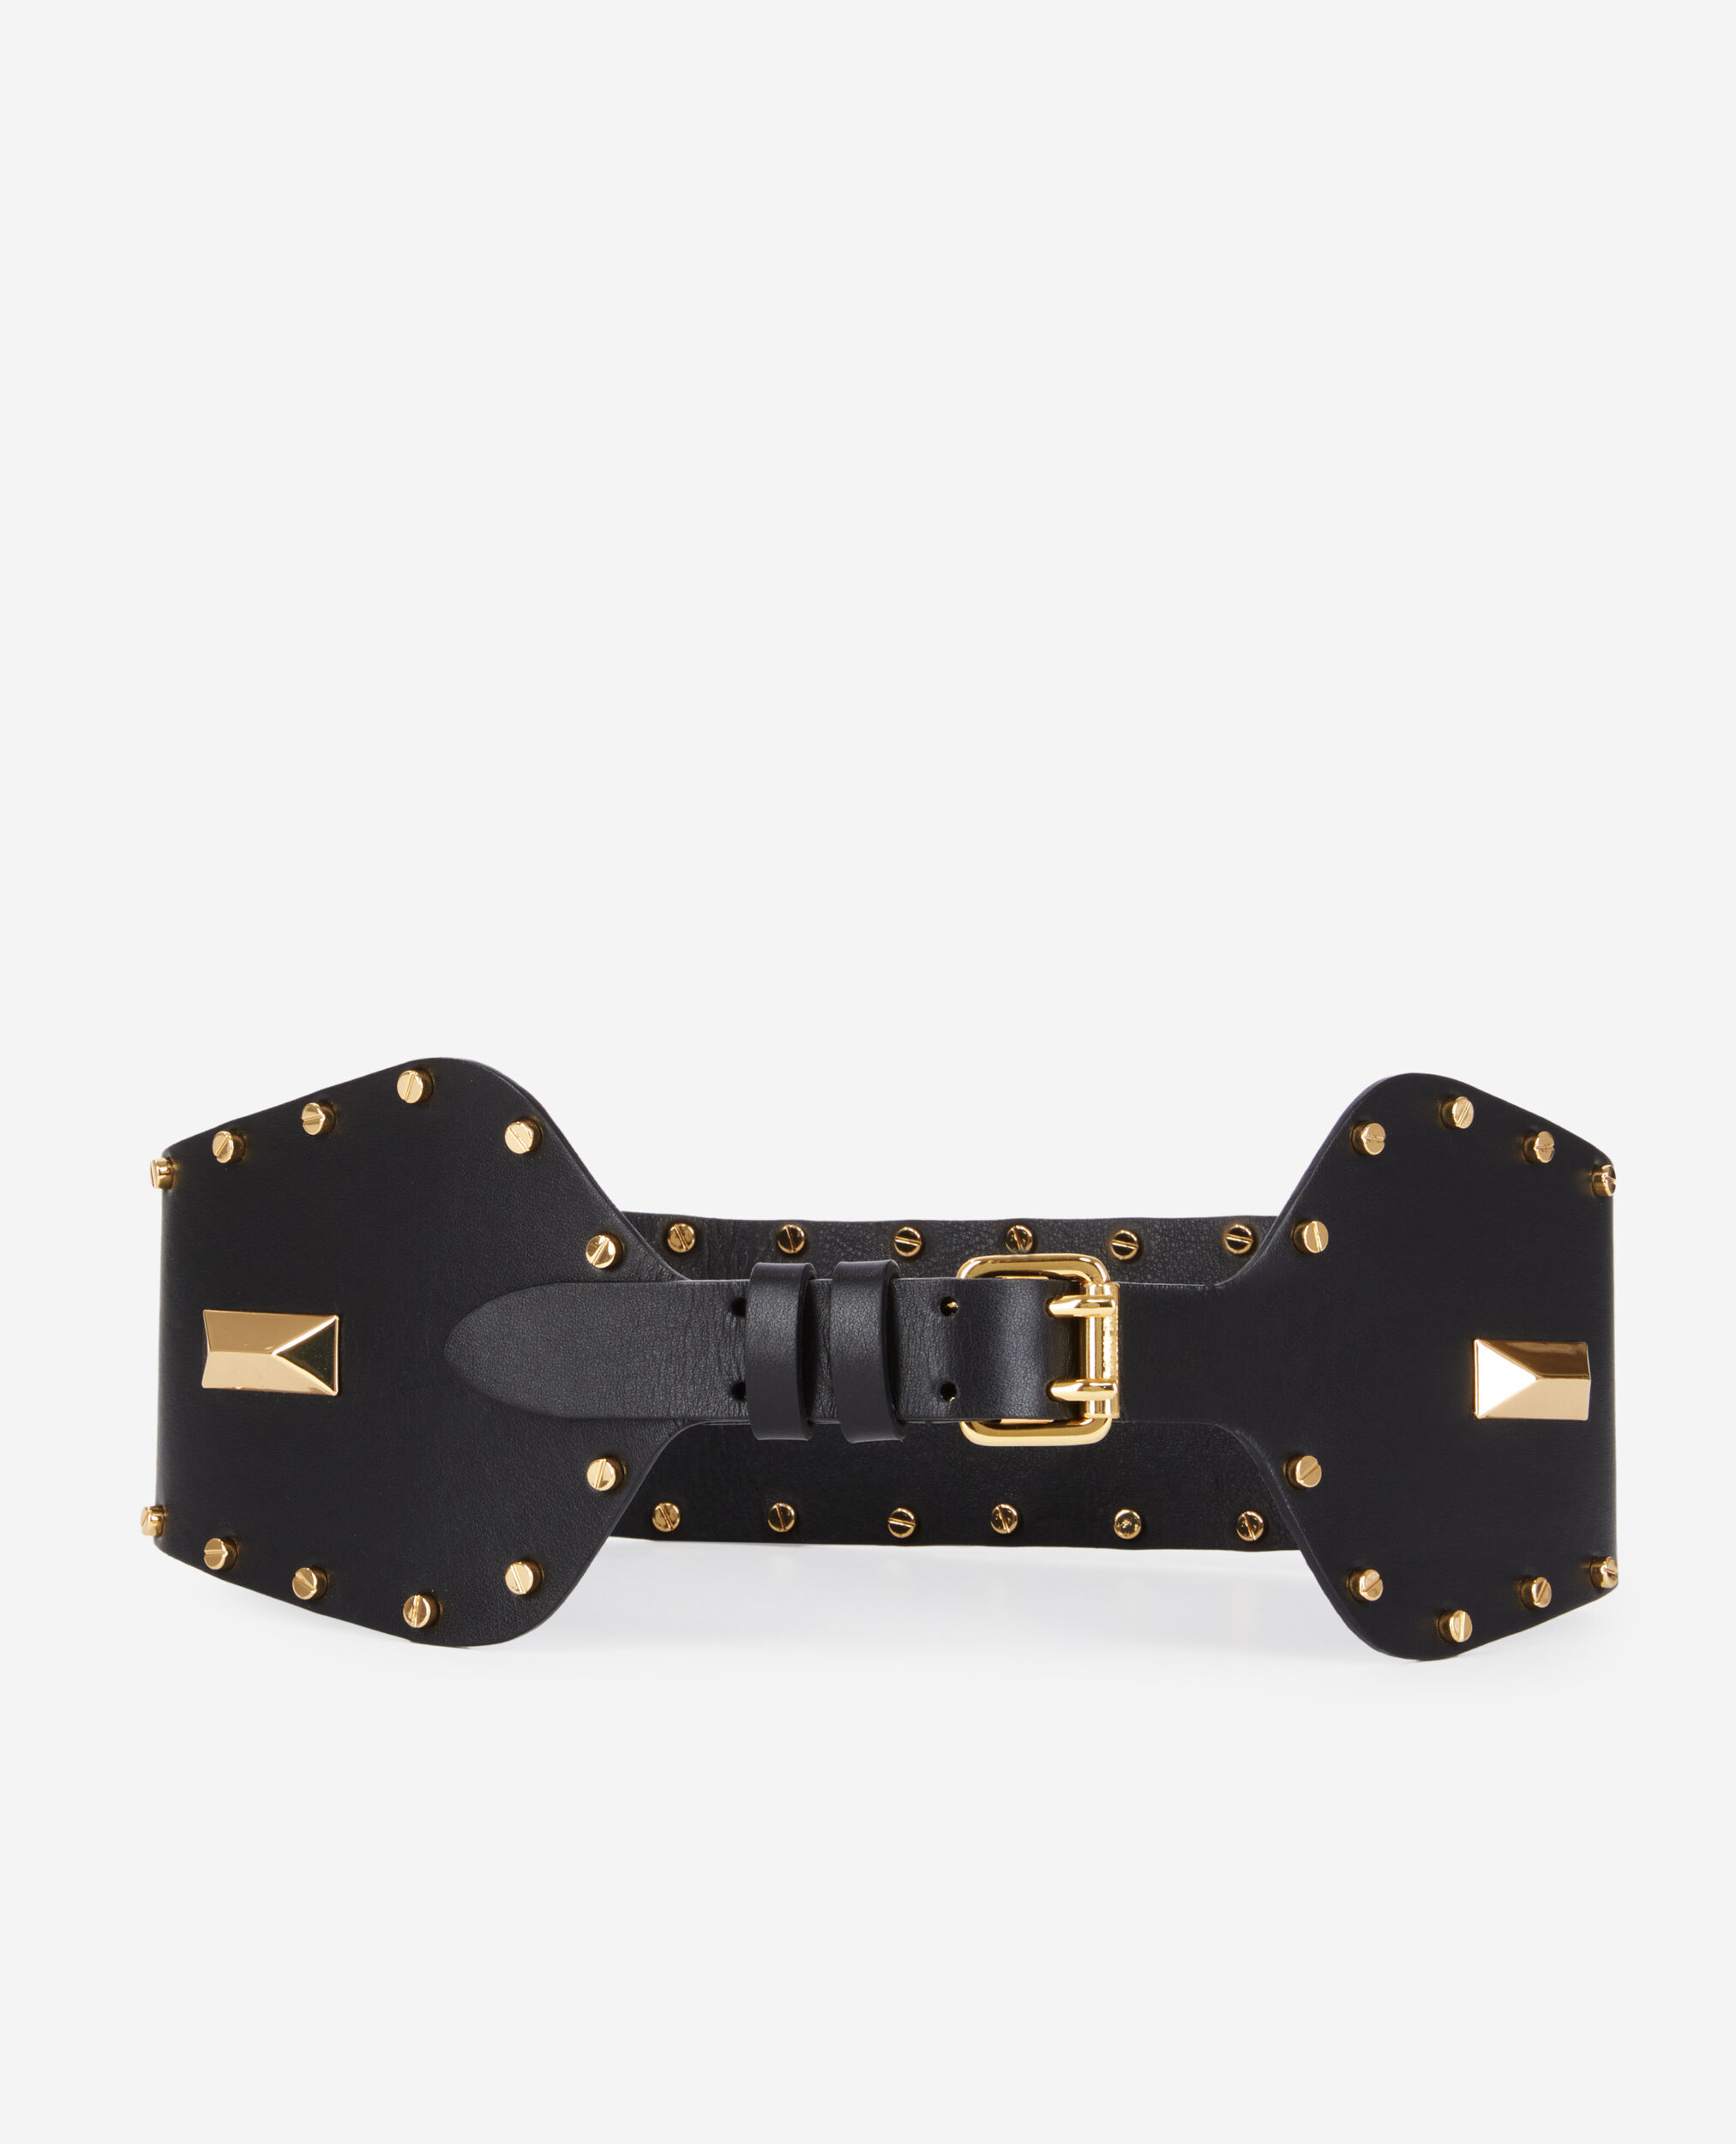 Wide black leather belt with studs and metallic inserts, BLACK, hi-res image number null